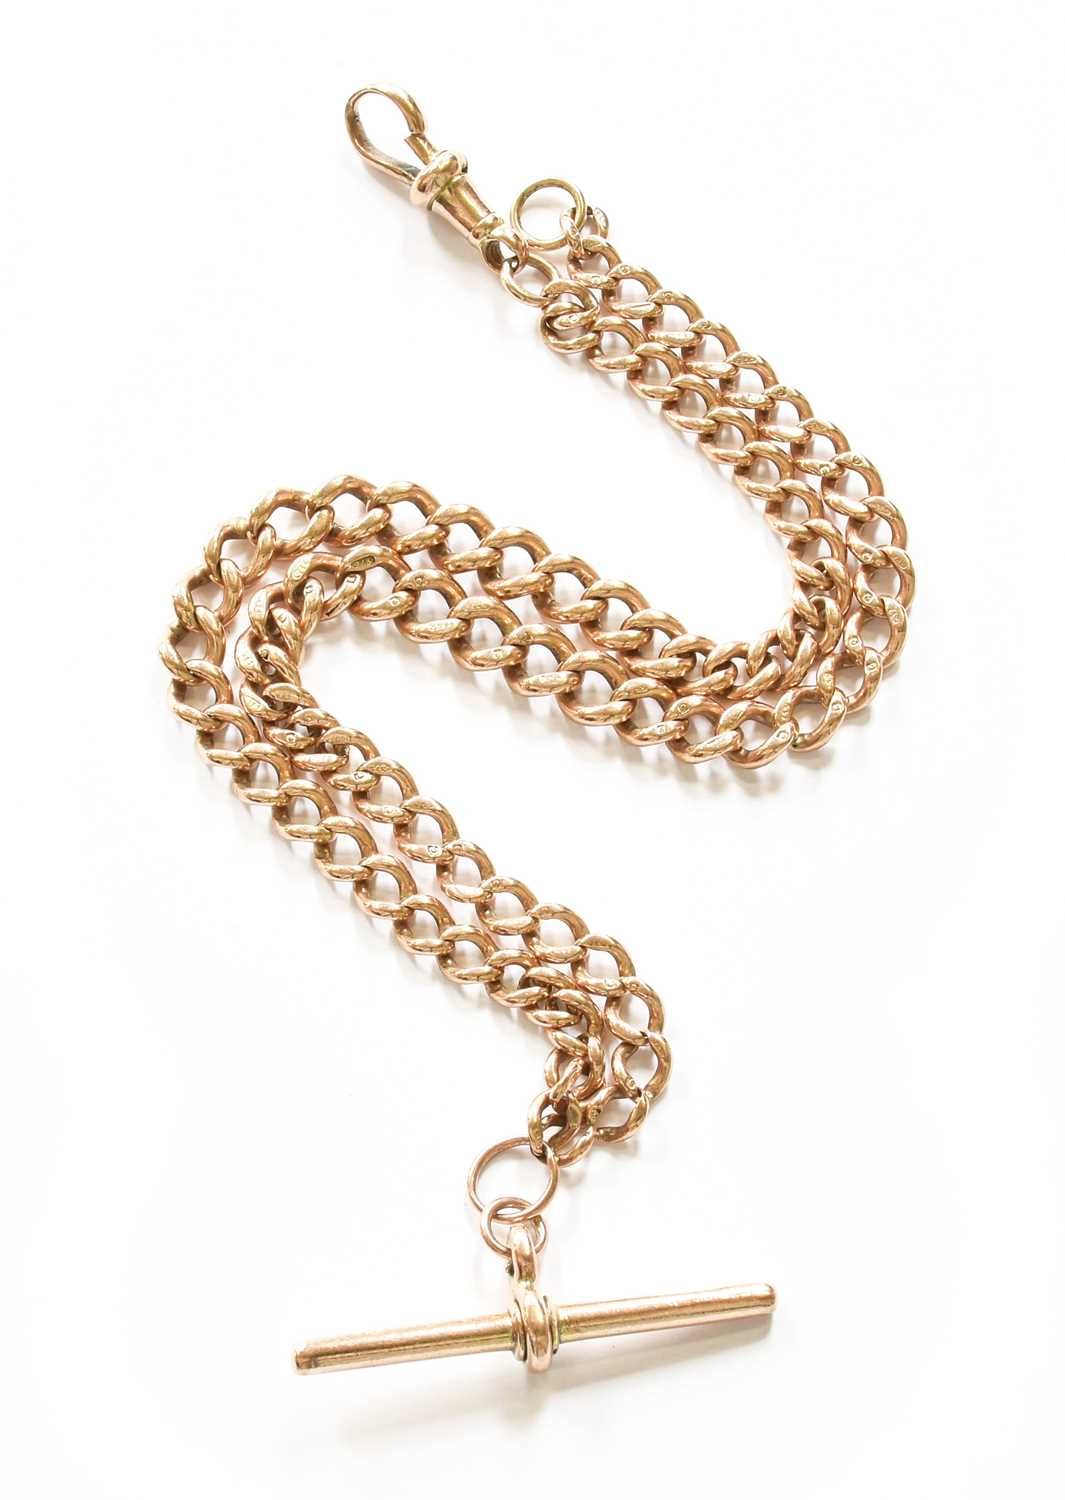 A Graduated Curb Link Watch Chain, each link stamped ‘9’ and ‘.375’, with a 9 carat gold T-bar,